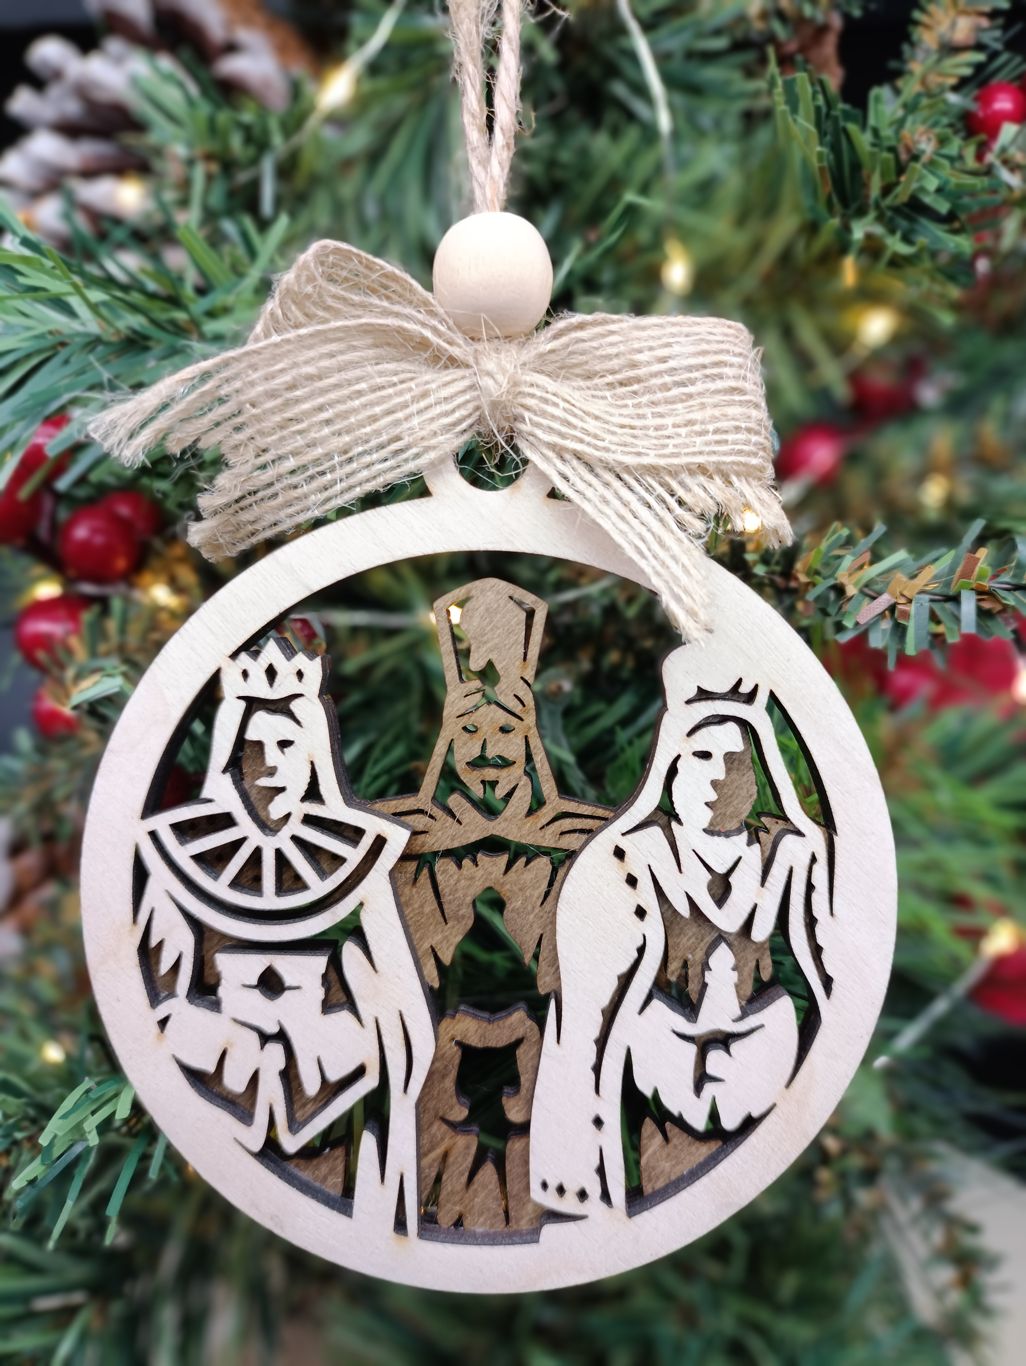 The Three Wise Men - Christmas Story Ornament